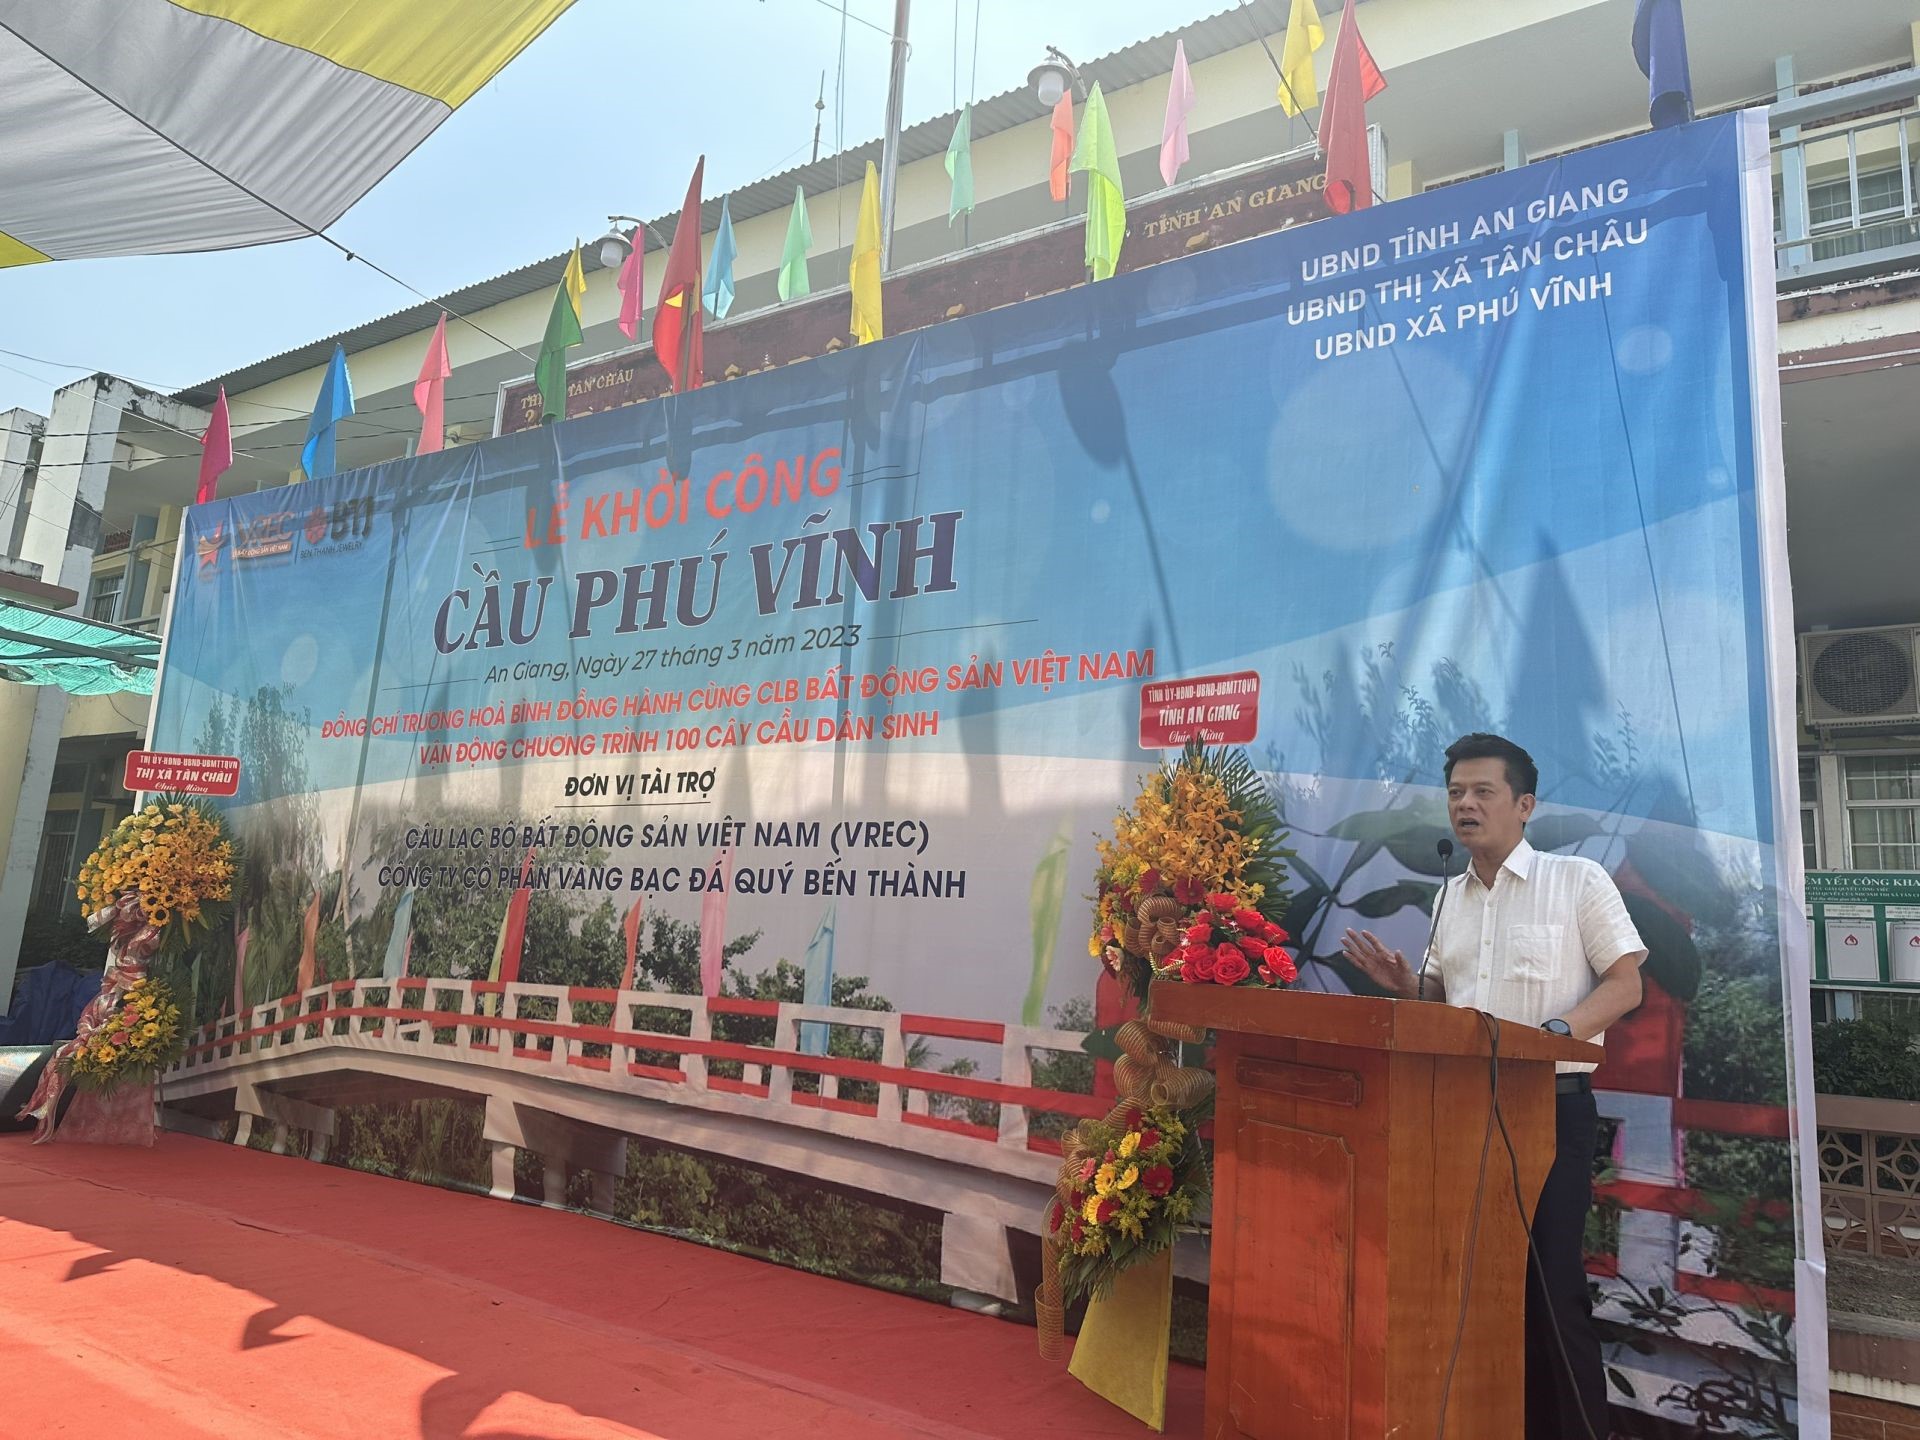 VREC Chairman Nguyen Quoc Bao spoke at the event.